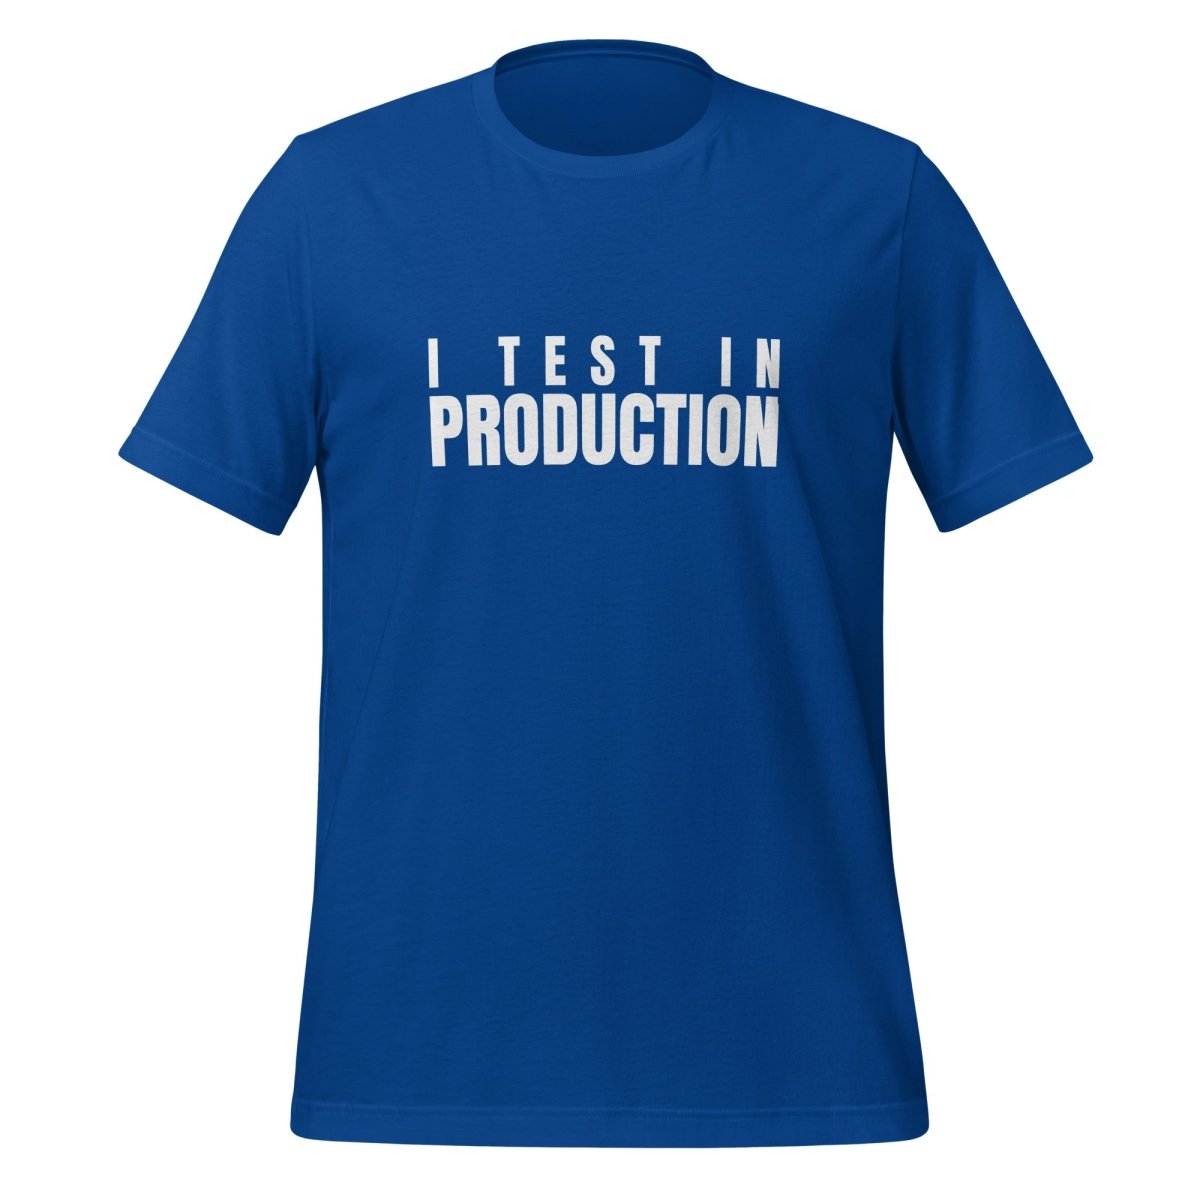 I Test in Production T - Shirt (unisex) - True Royal - AI Store